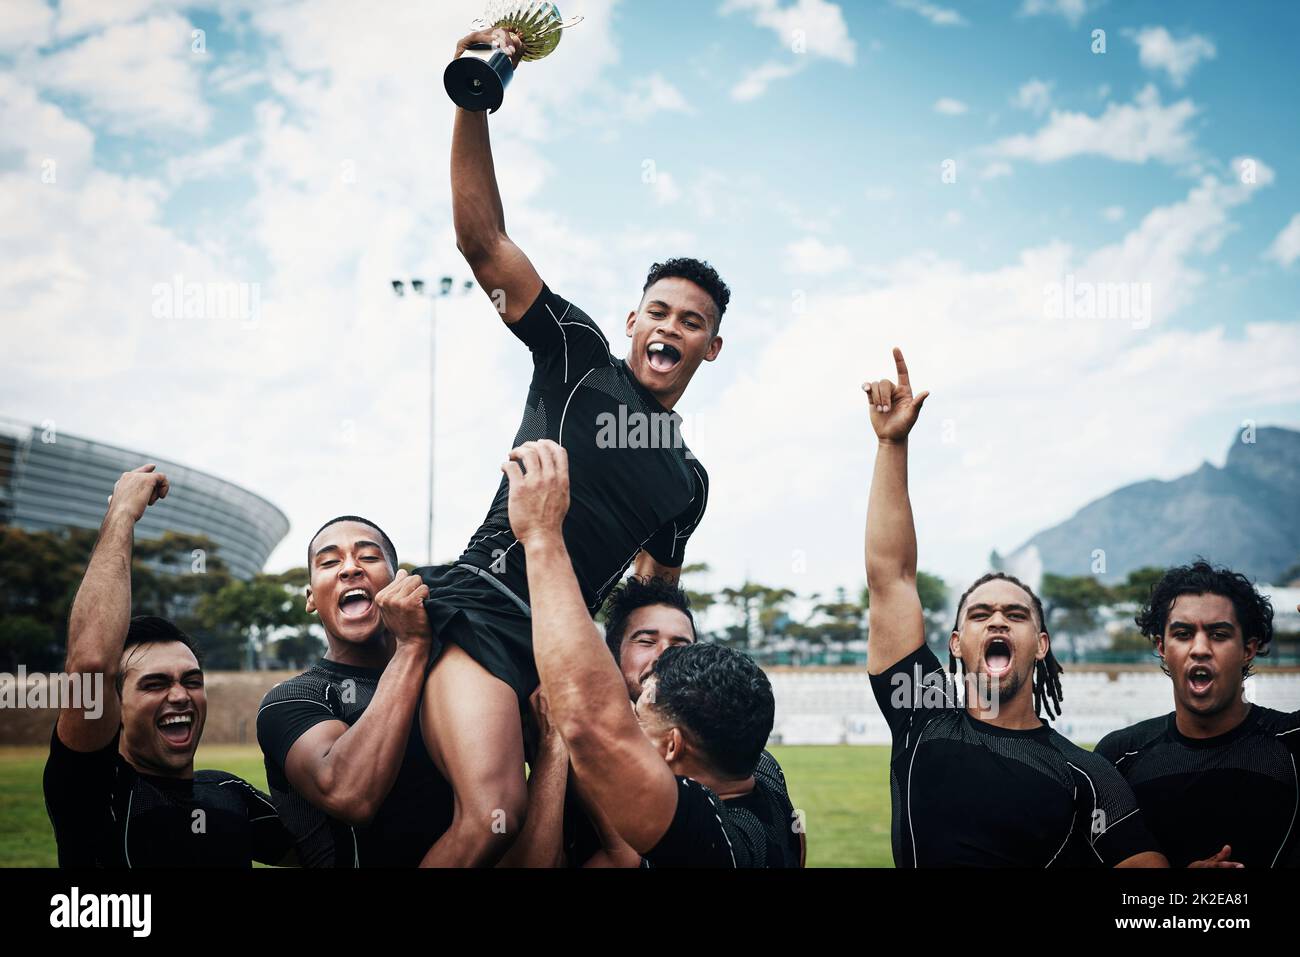 Theyre not just any team theyre rugby cup winners. Cropped shot of a handsome young rugby player holding up a trophy while celebrating with his team on the field. Stock Photo